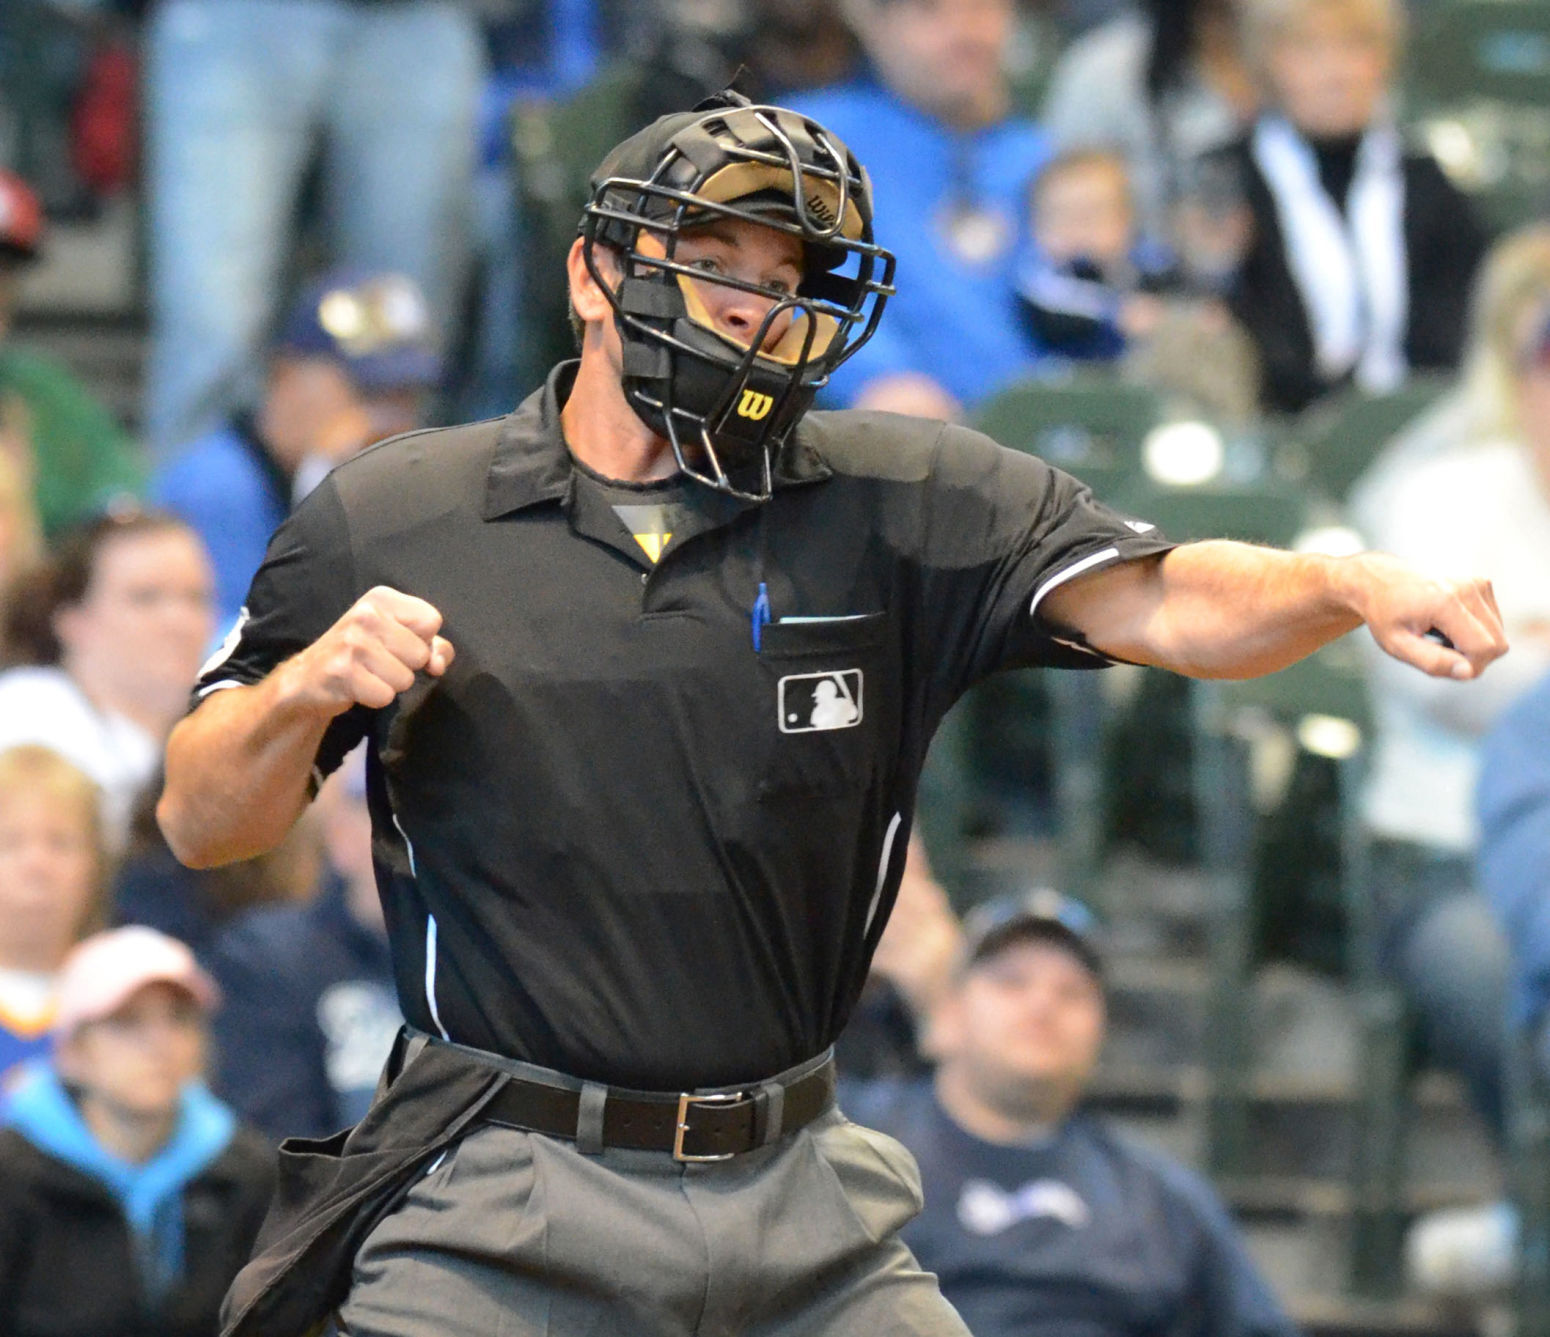 Umpire MLB discrimination lawsuit should stay in Ohio